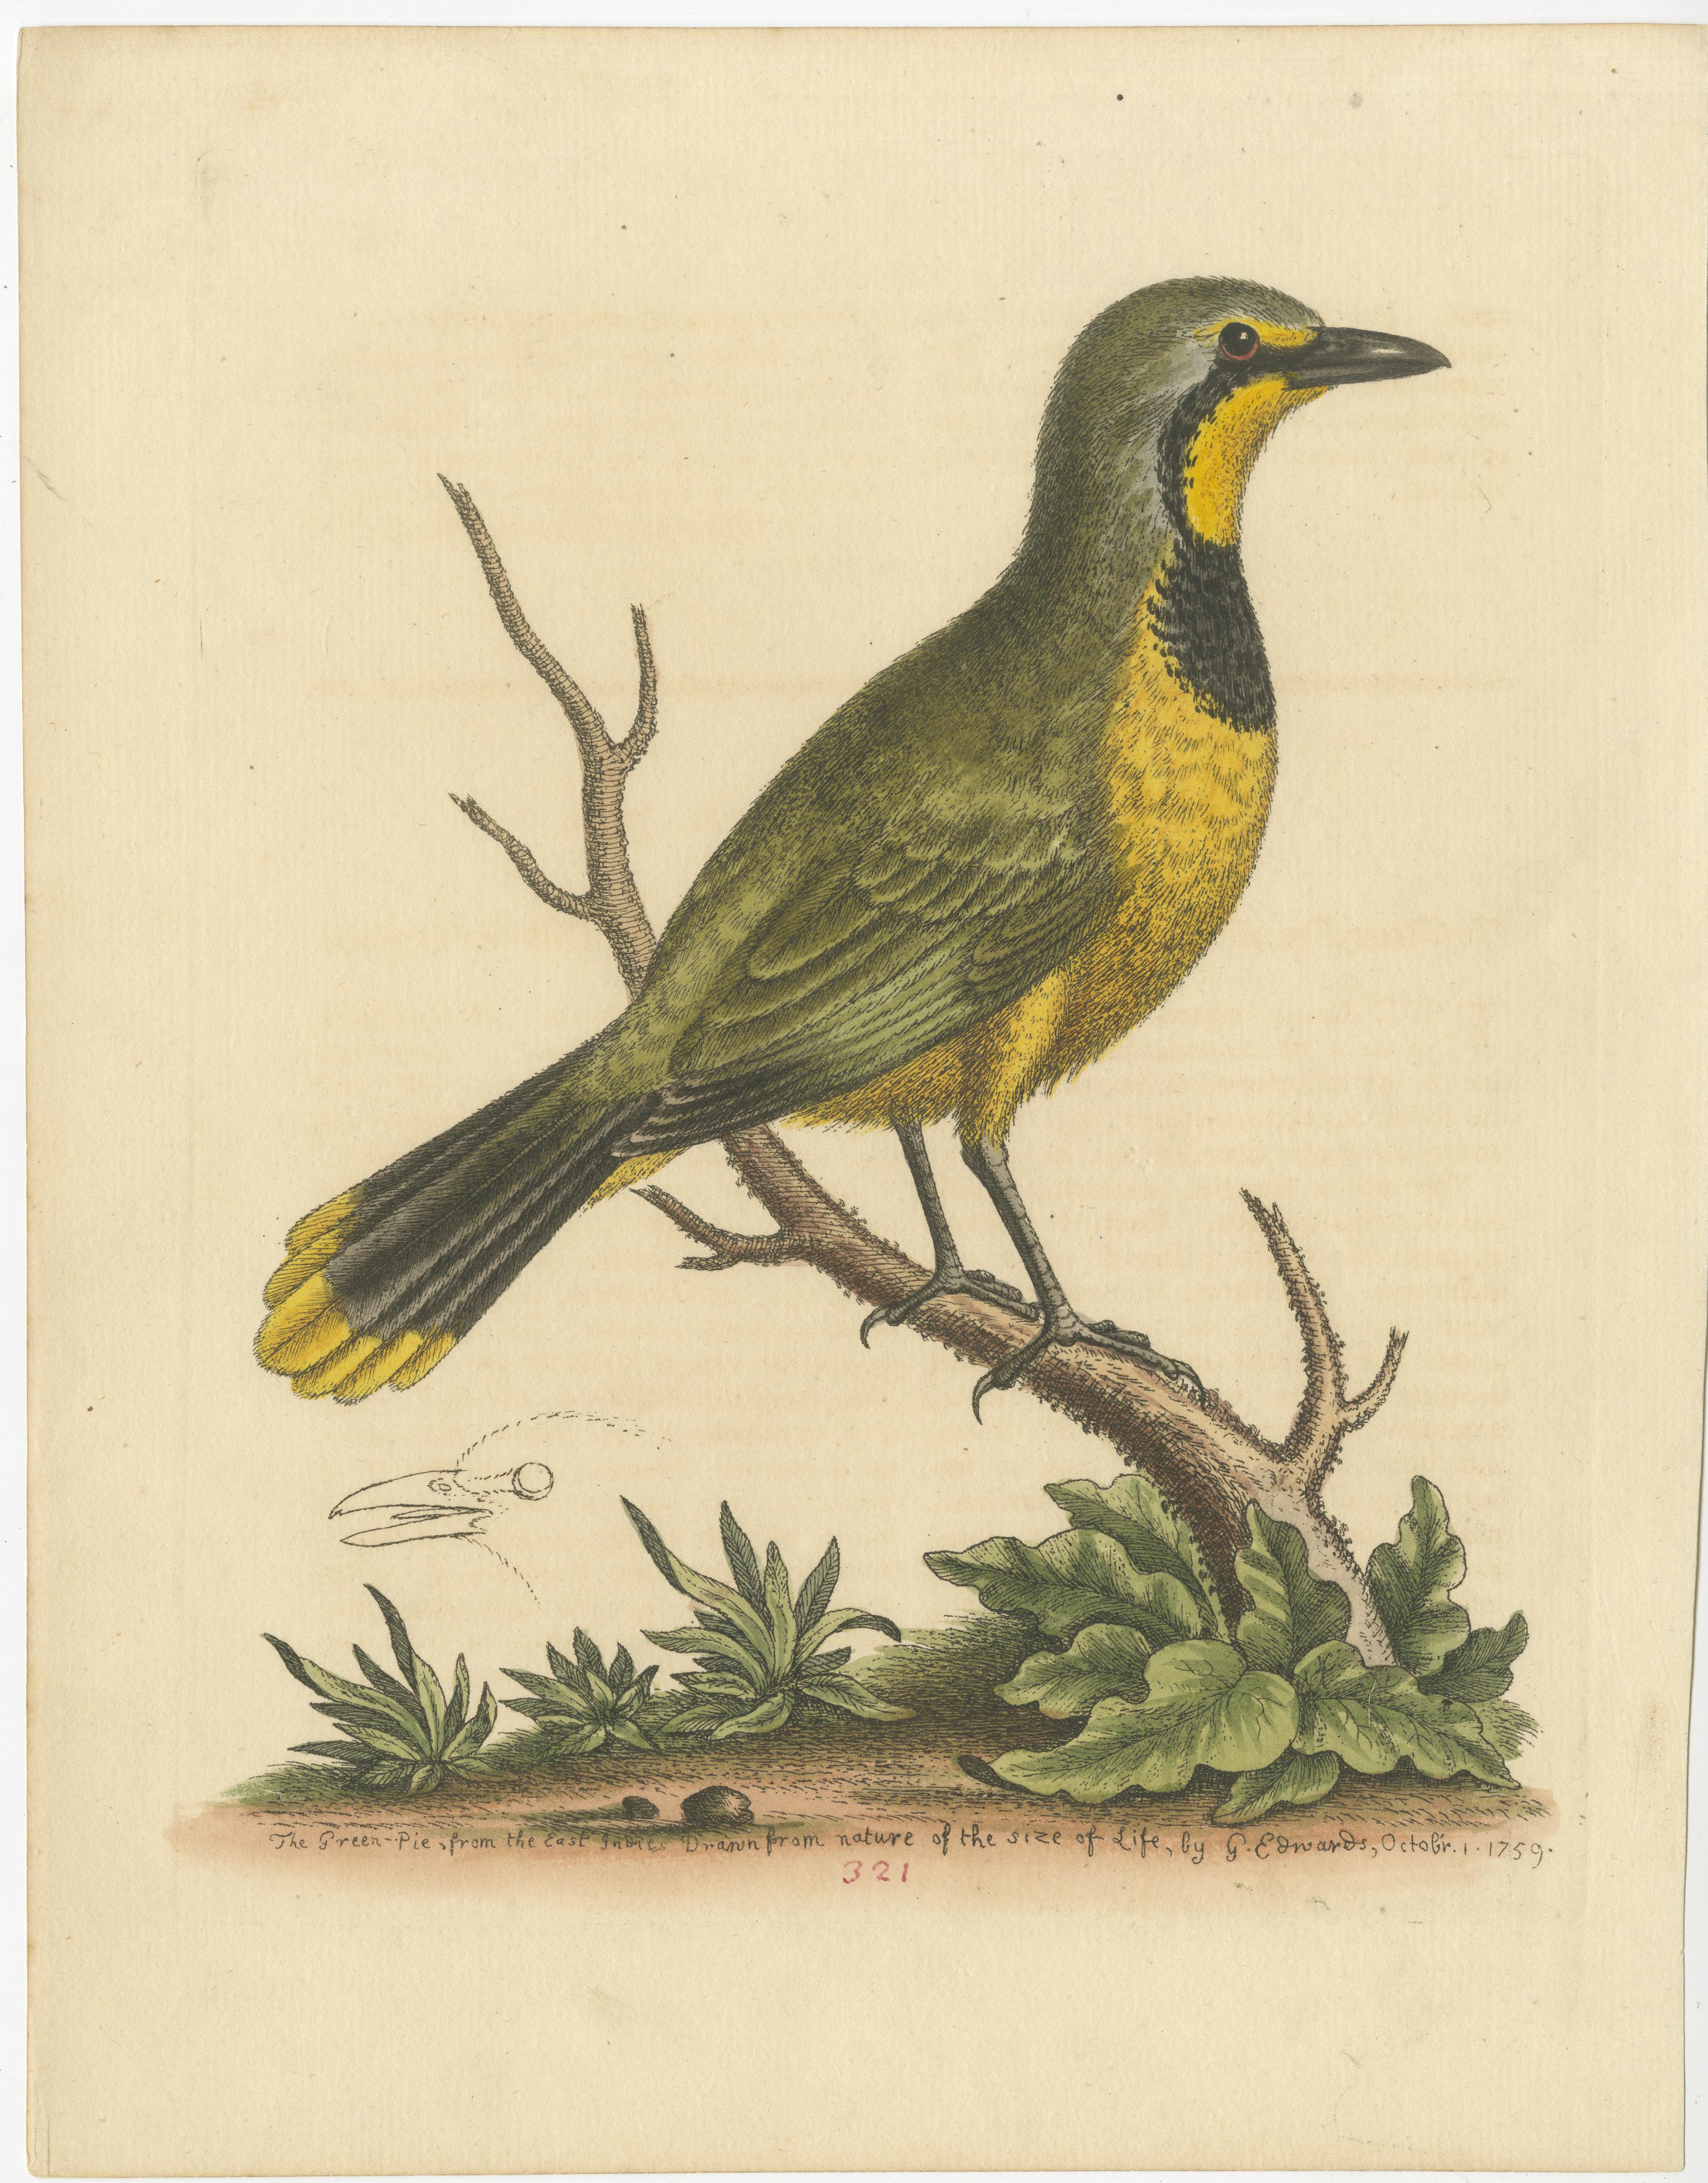 An original delicate and captivating antique print, labeled 'The Green-Pie from the East Indies.' It is a representation of a bird, specifically a Green Magpie, with origins in the East Indies region, which includes parts of modern-day Southeast